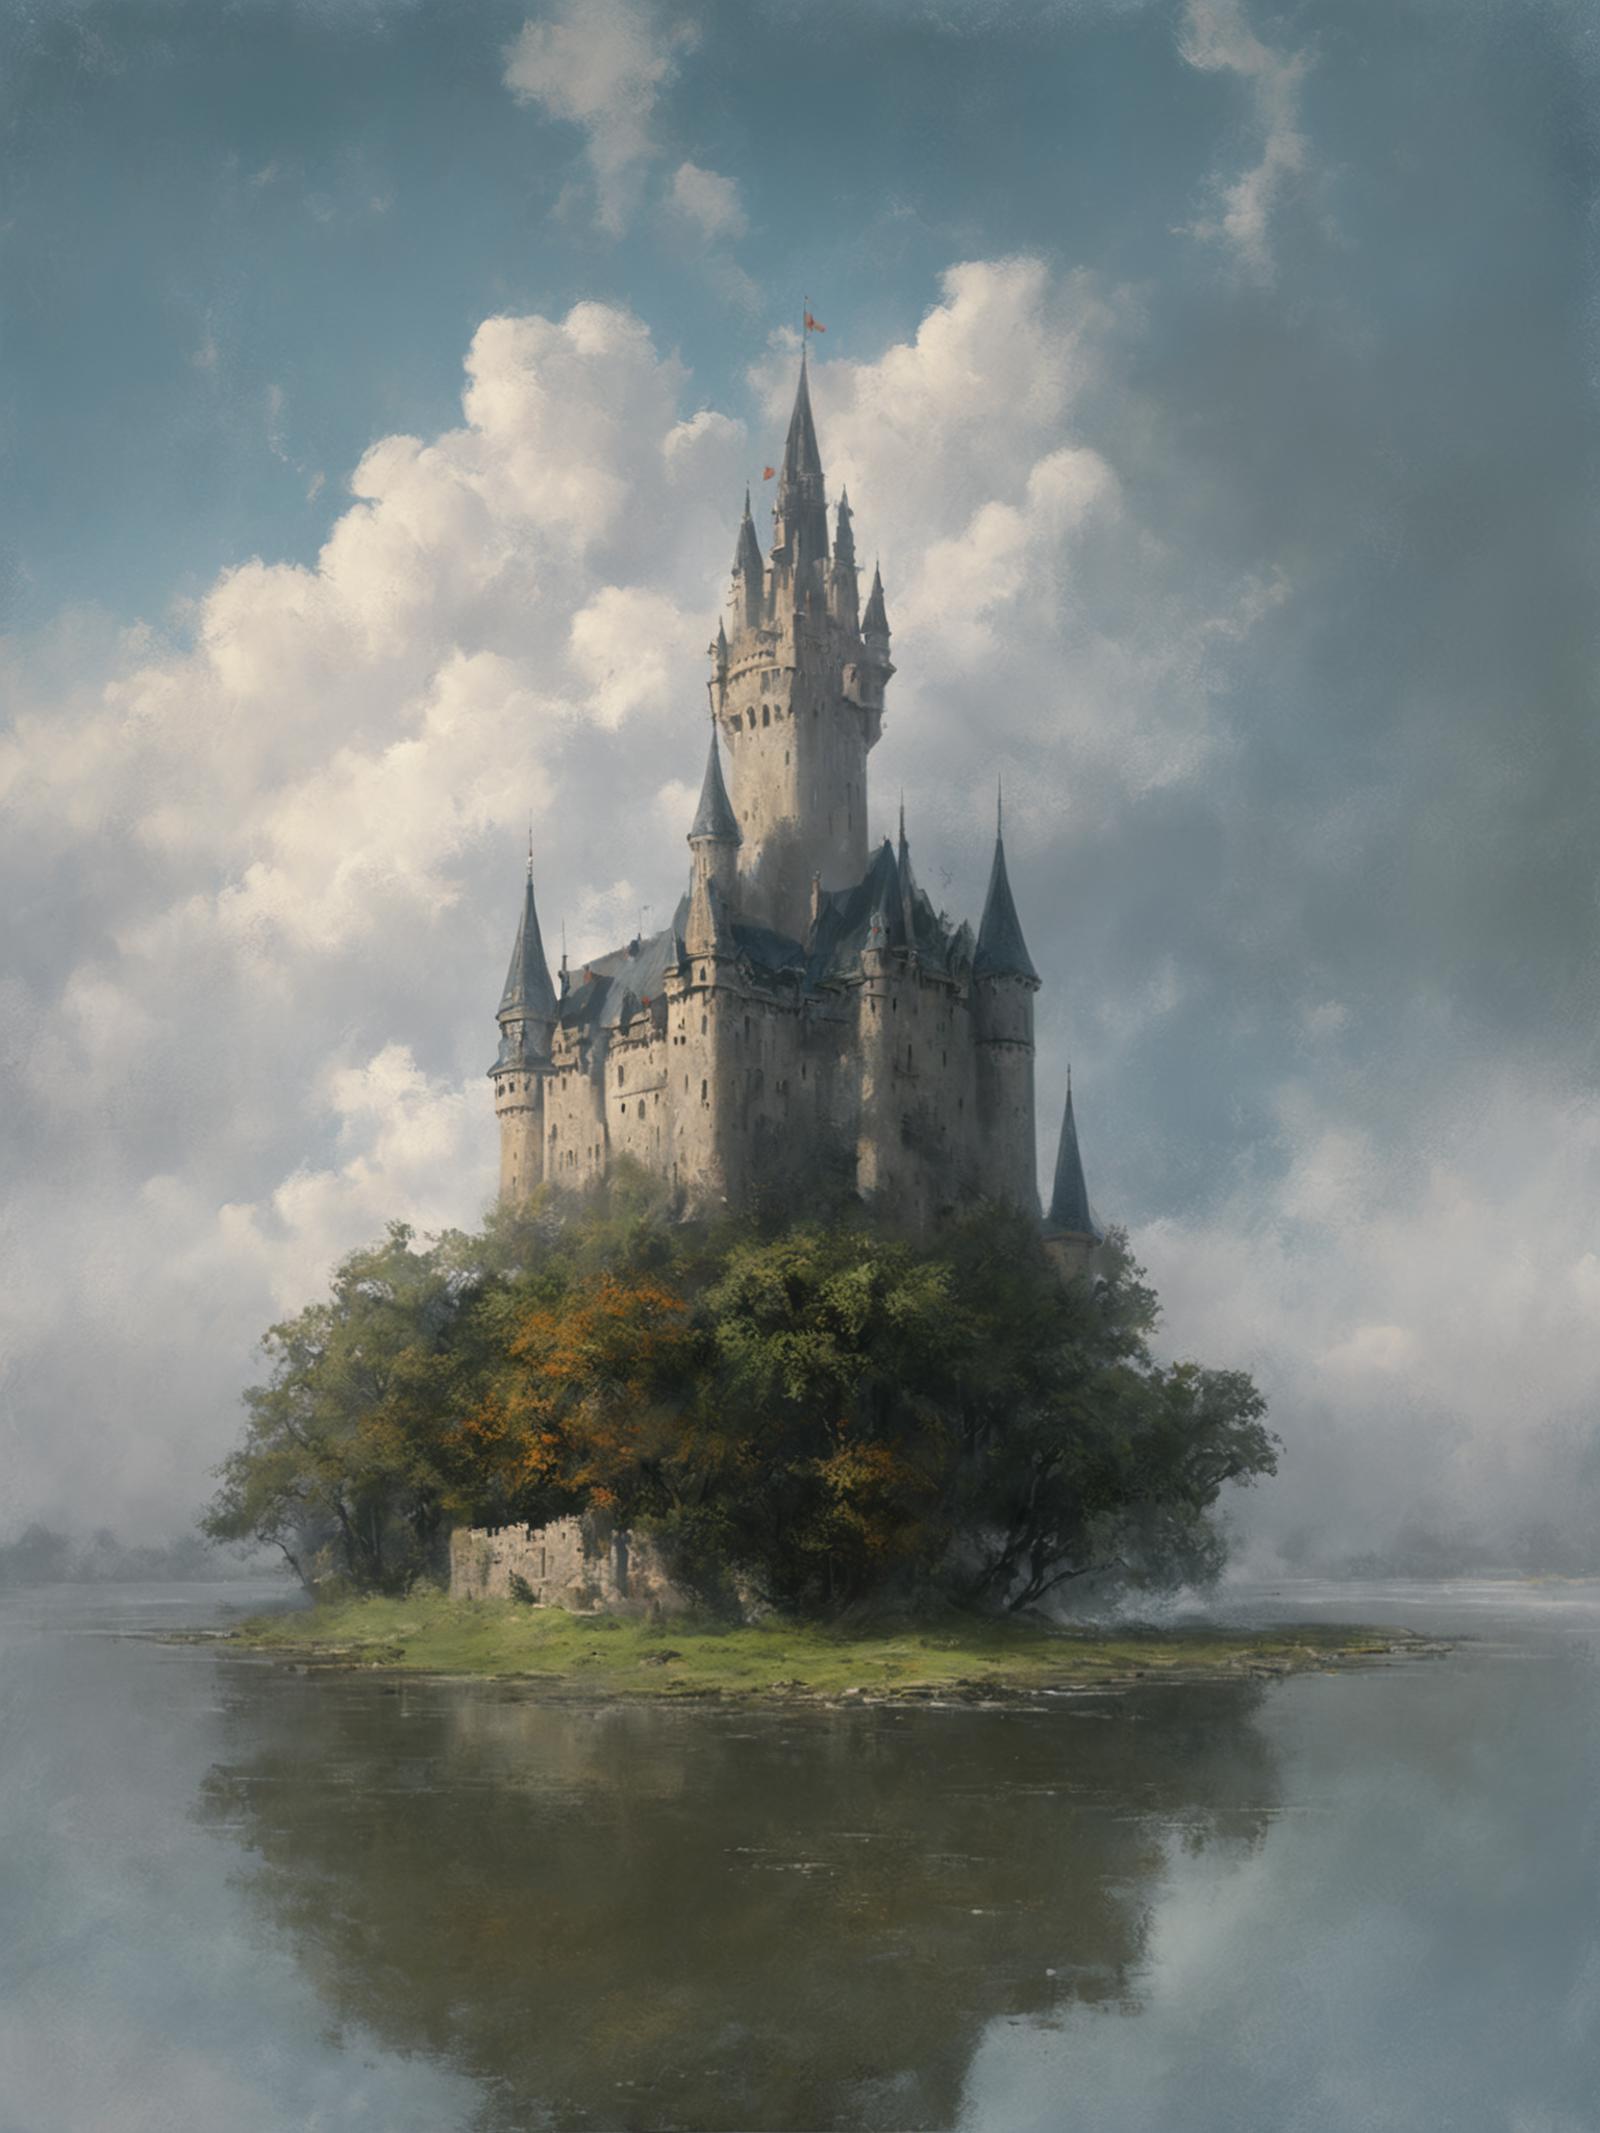 A Beautiful Castle on a Island in the Water